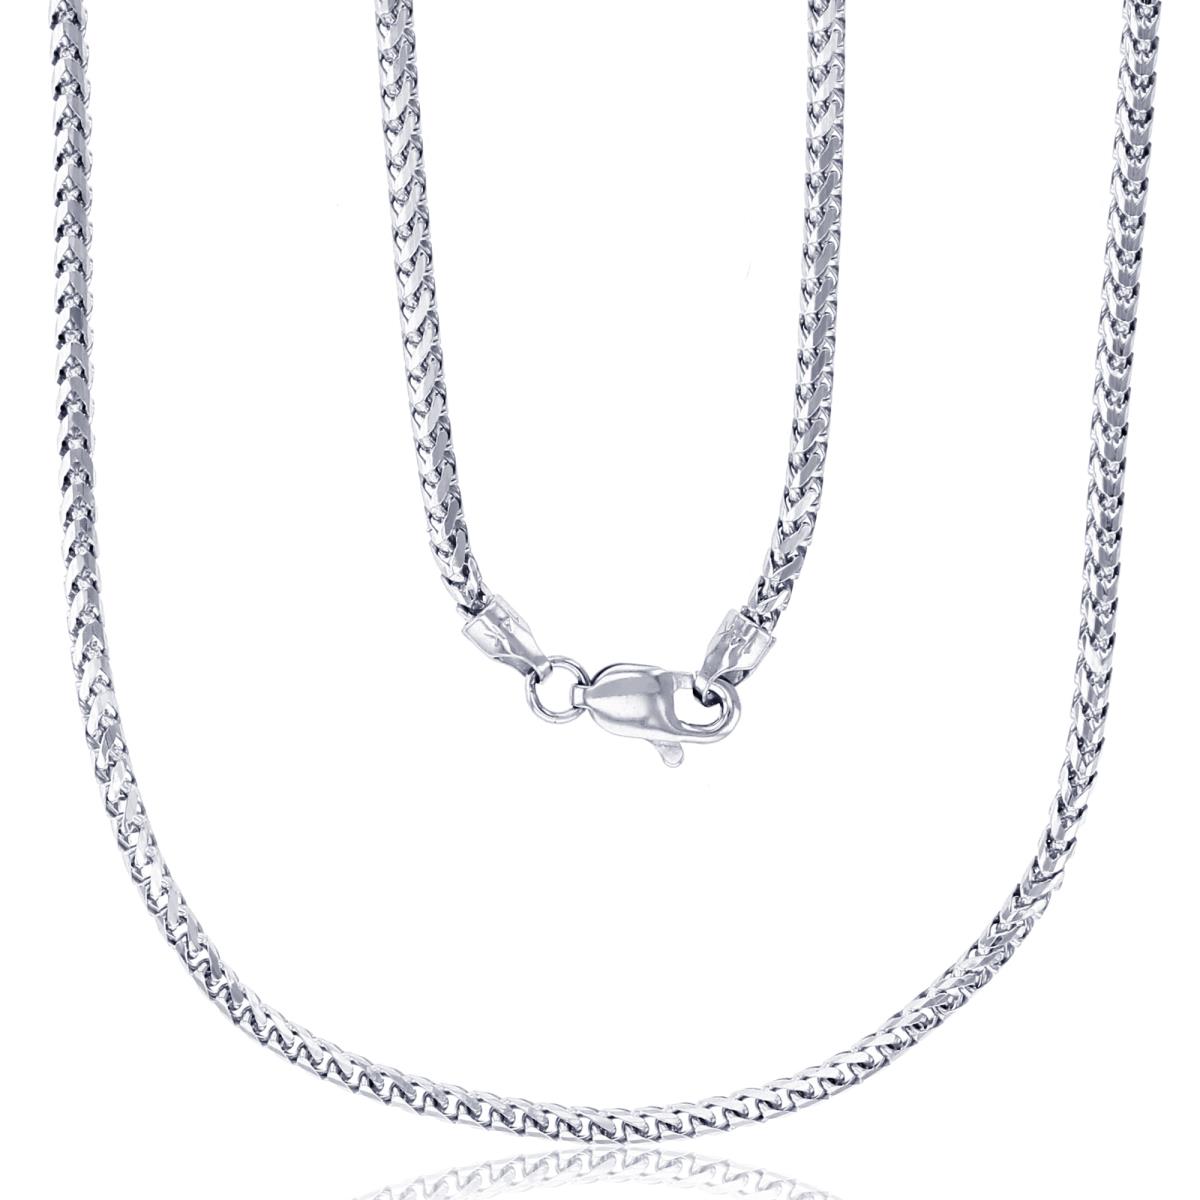 14K White Gold 2.25mm 24" Solid Franco 065 Chain